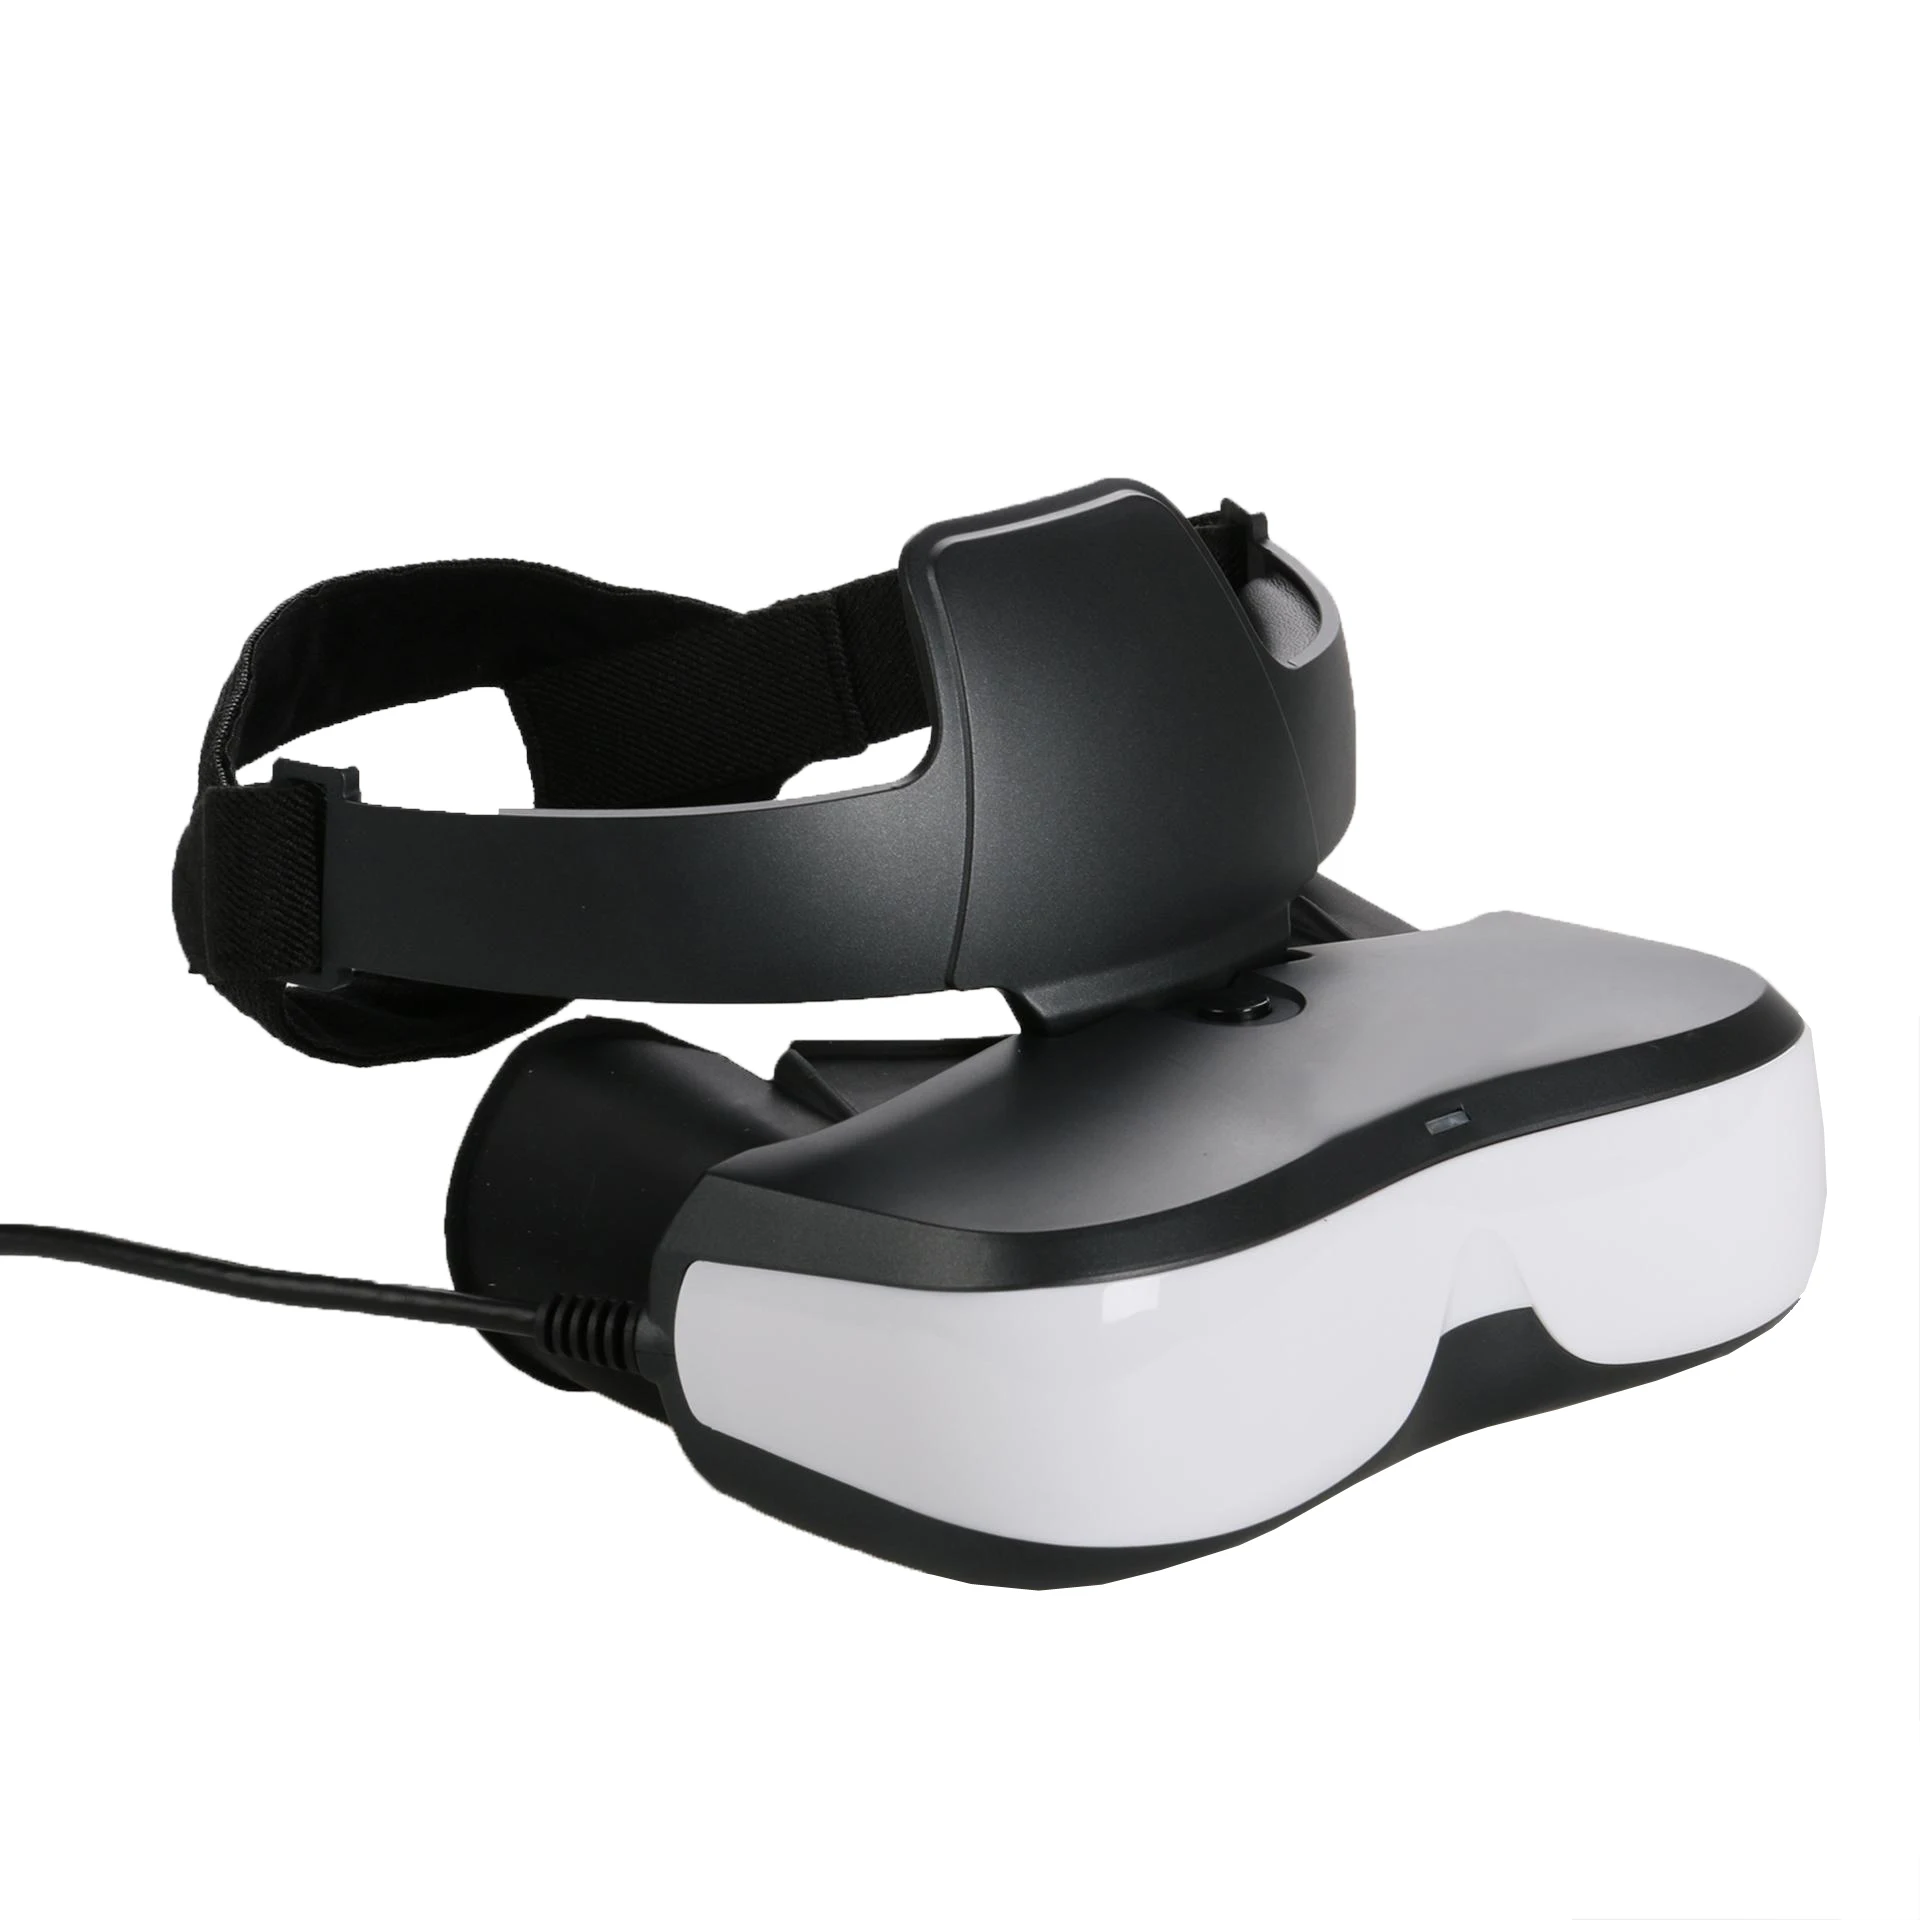 

3D Video Glasses Vision HMD Helmet Binocular HD display with HDMI Input Use in PS4,PS5,Switch ,UAV Video Glasses E536